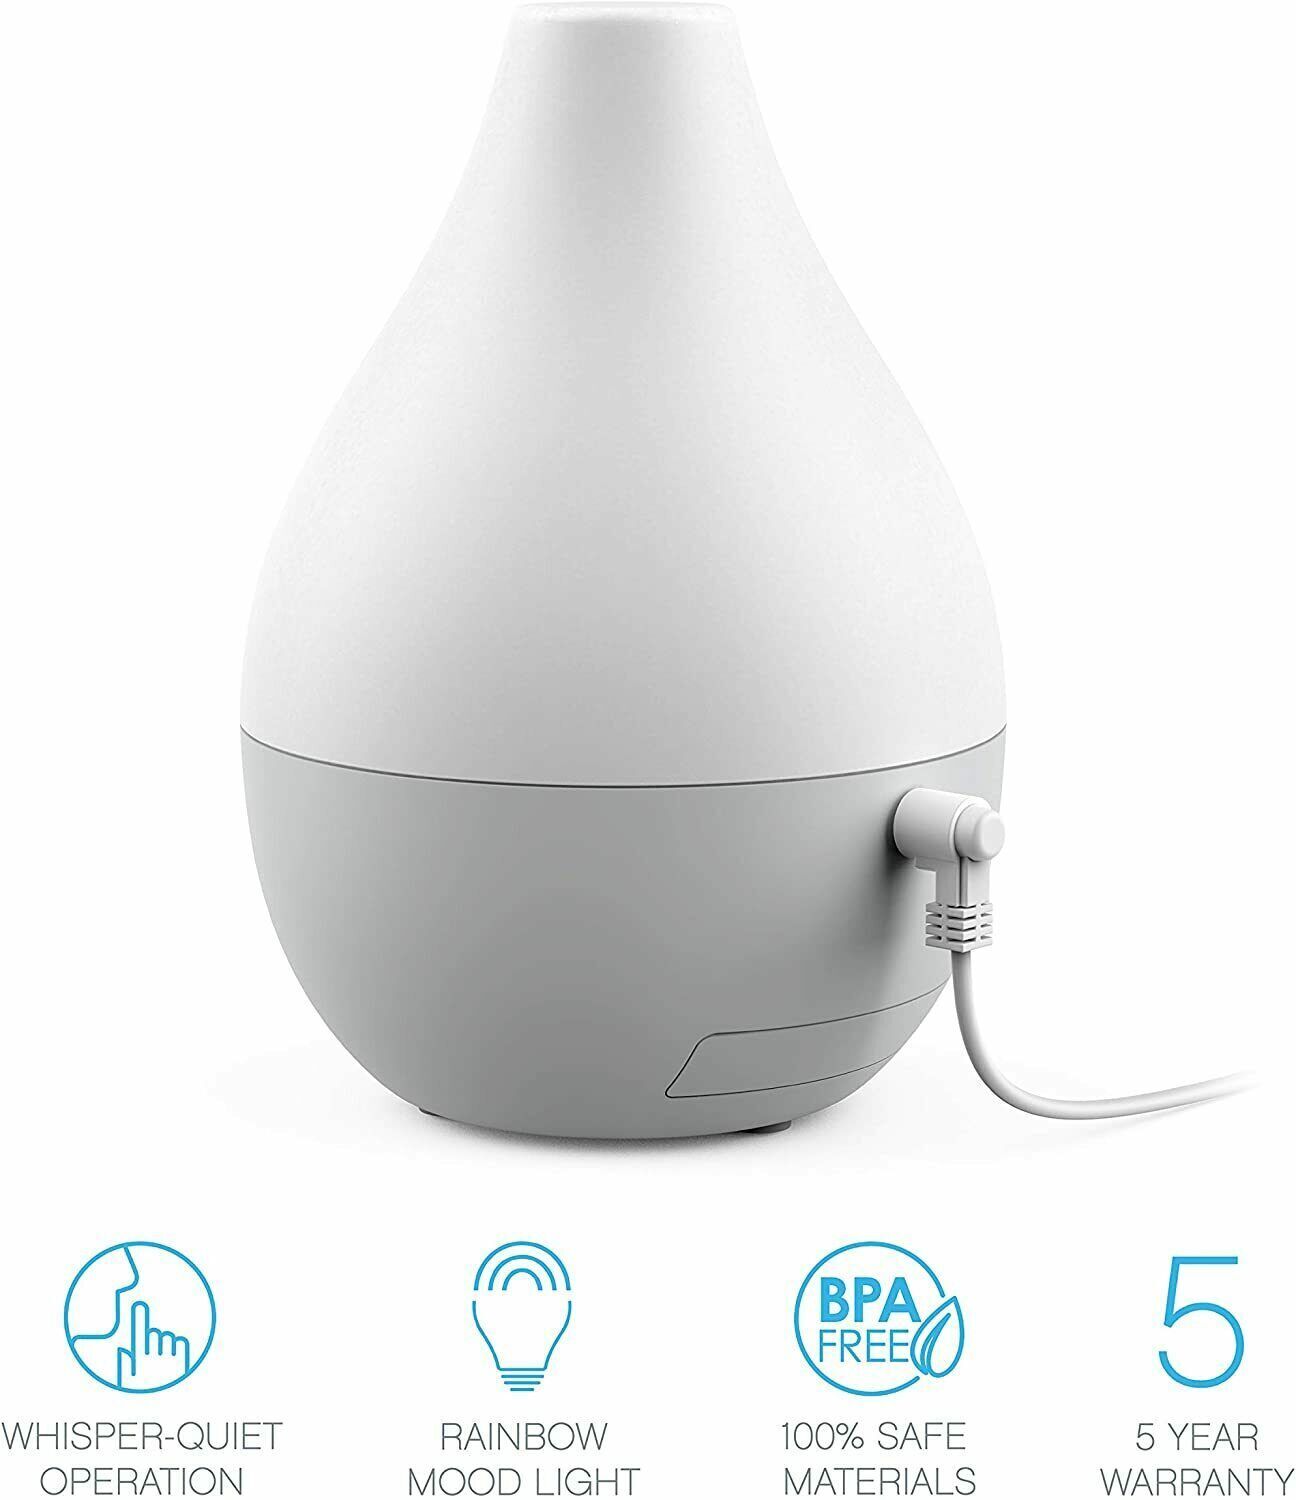 Ultrasonic essential oil diffuser with quiet operation, mood lighting, bpa-free materials, and a five-year warranty featuring a hidden WiFi camera for home surveillance.